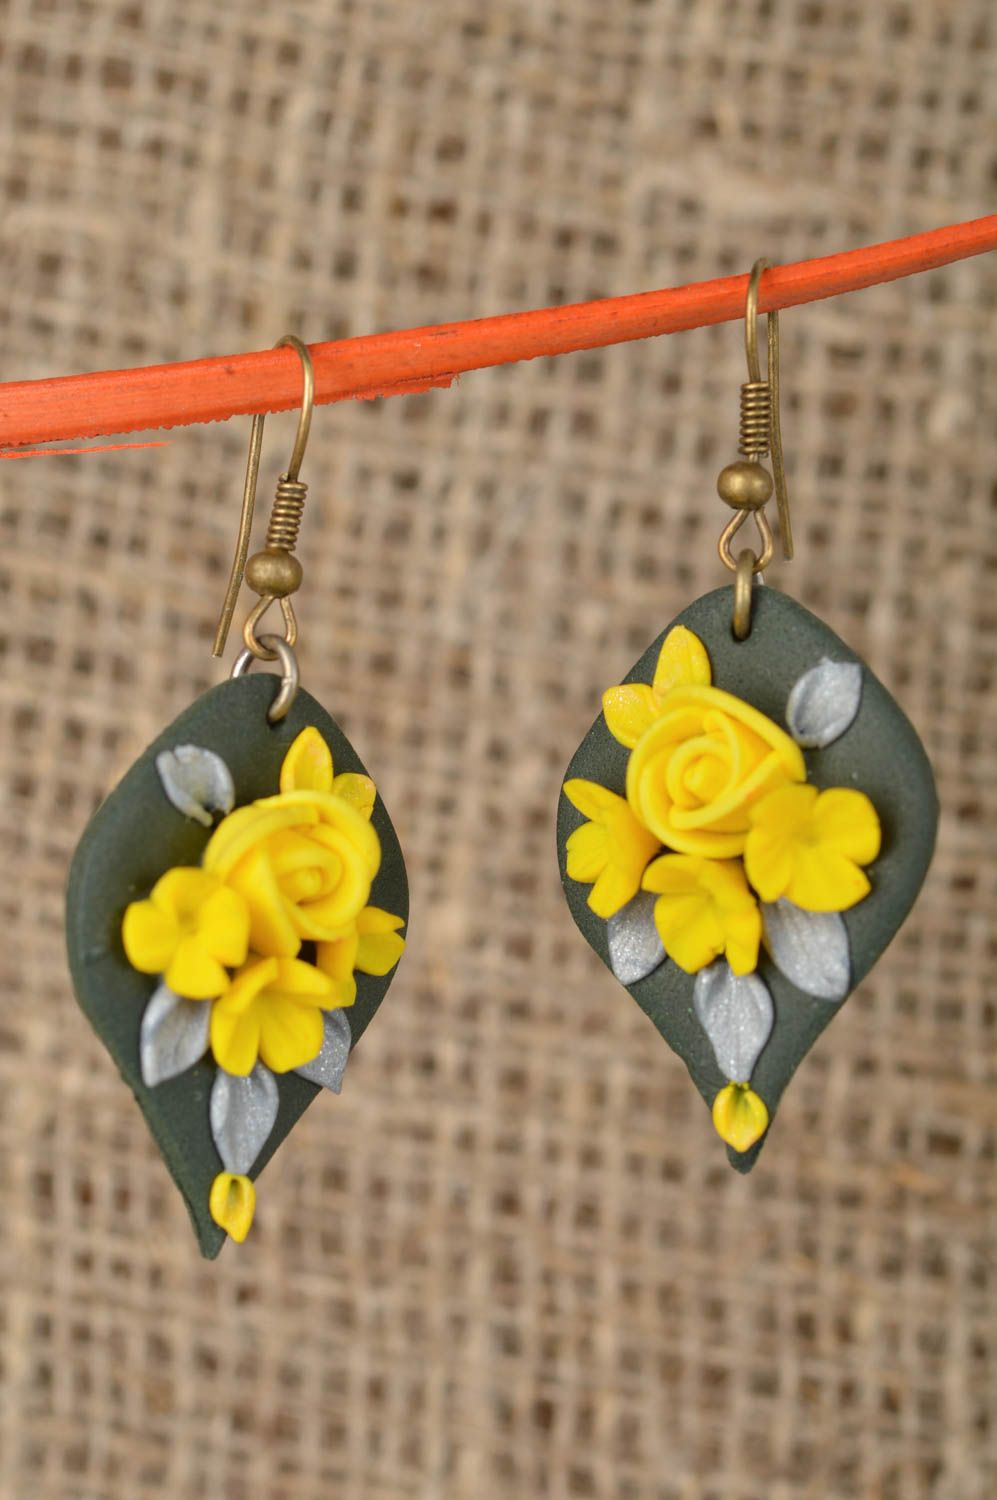 Polymer clay handmade designer earrings with yellow roses beautiful accessory photo 1